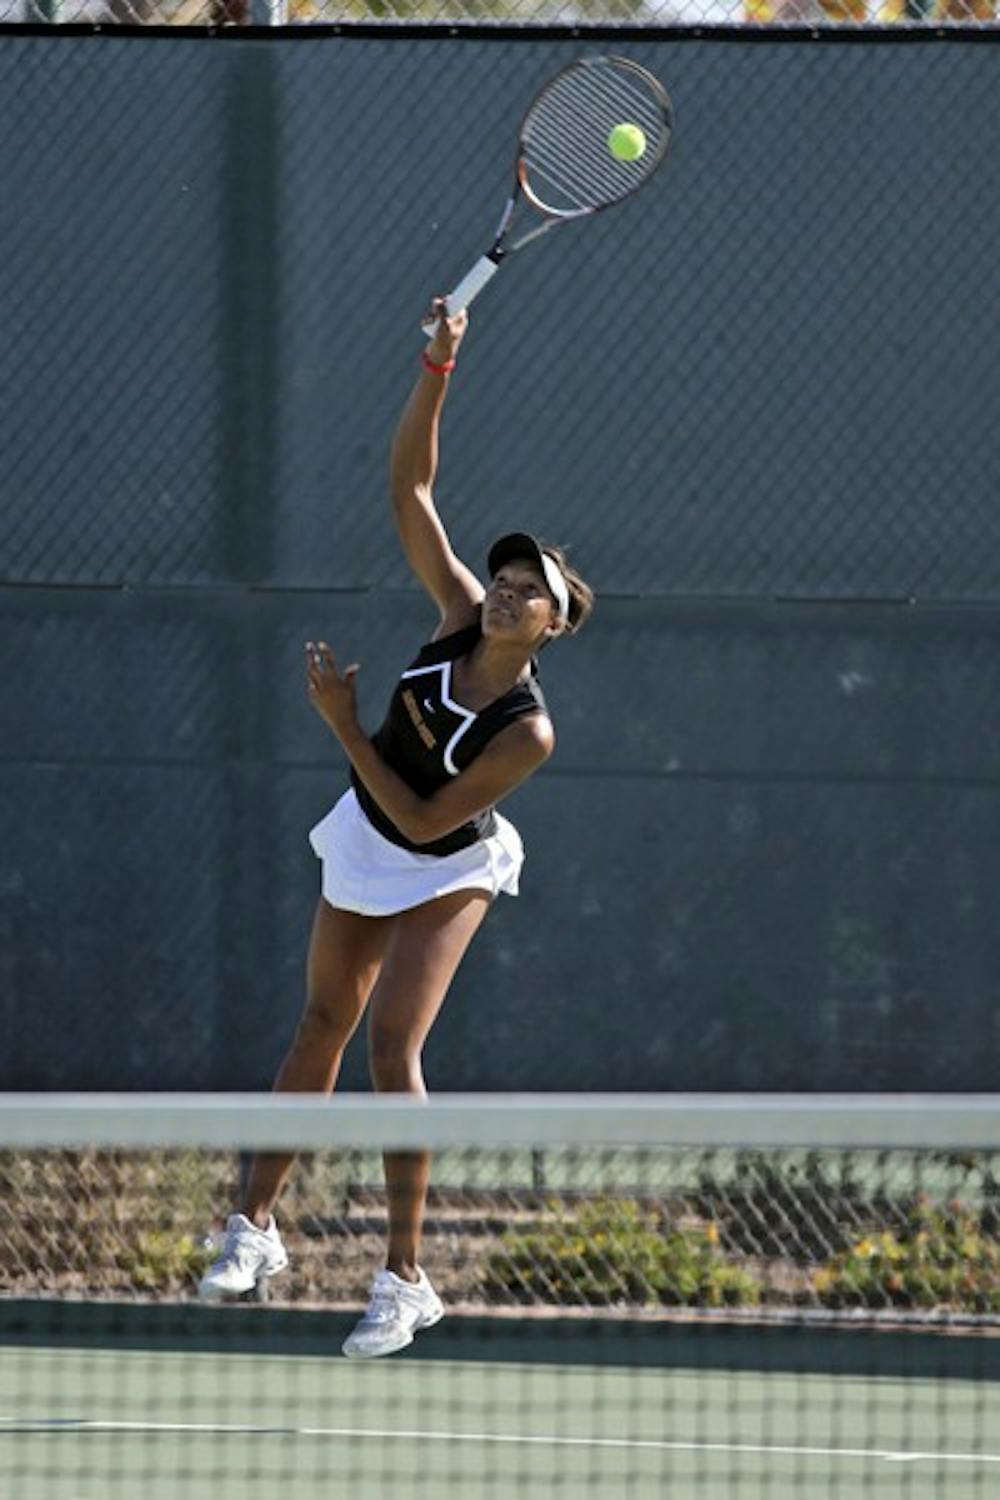 JUST VISITING: Junior Ashlee Brown is one of four international players on the Sun Devild tennis roster. Recruiting players from outside the U.S. has become a common practice for college programs. (Photo by Kyle Thompson)